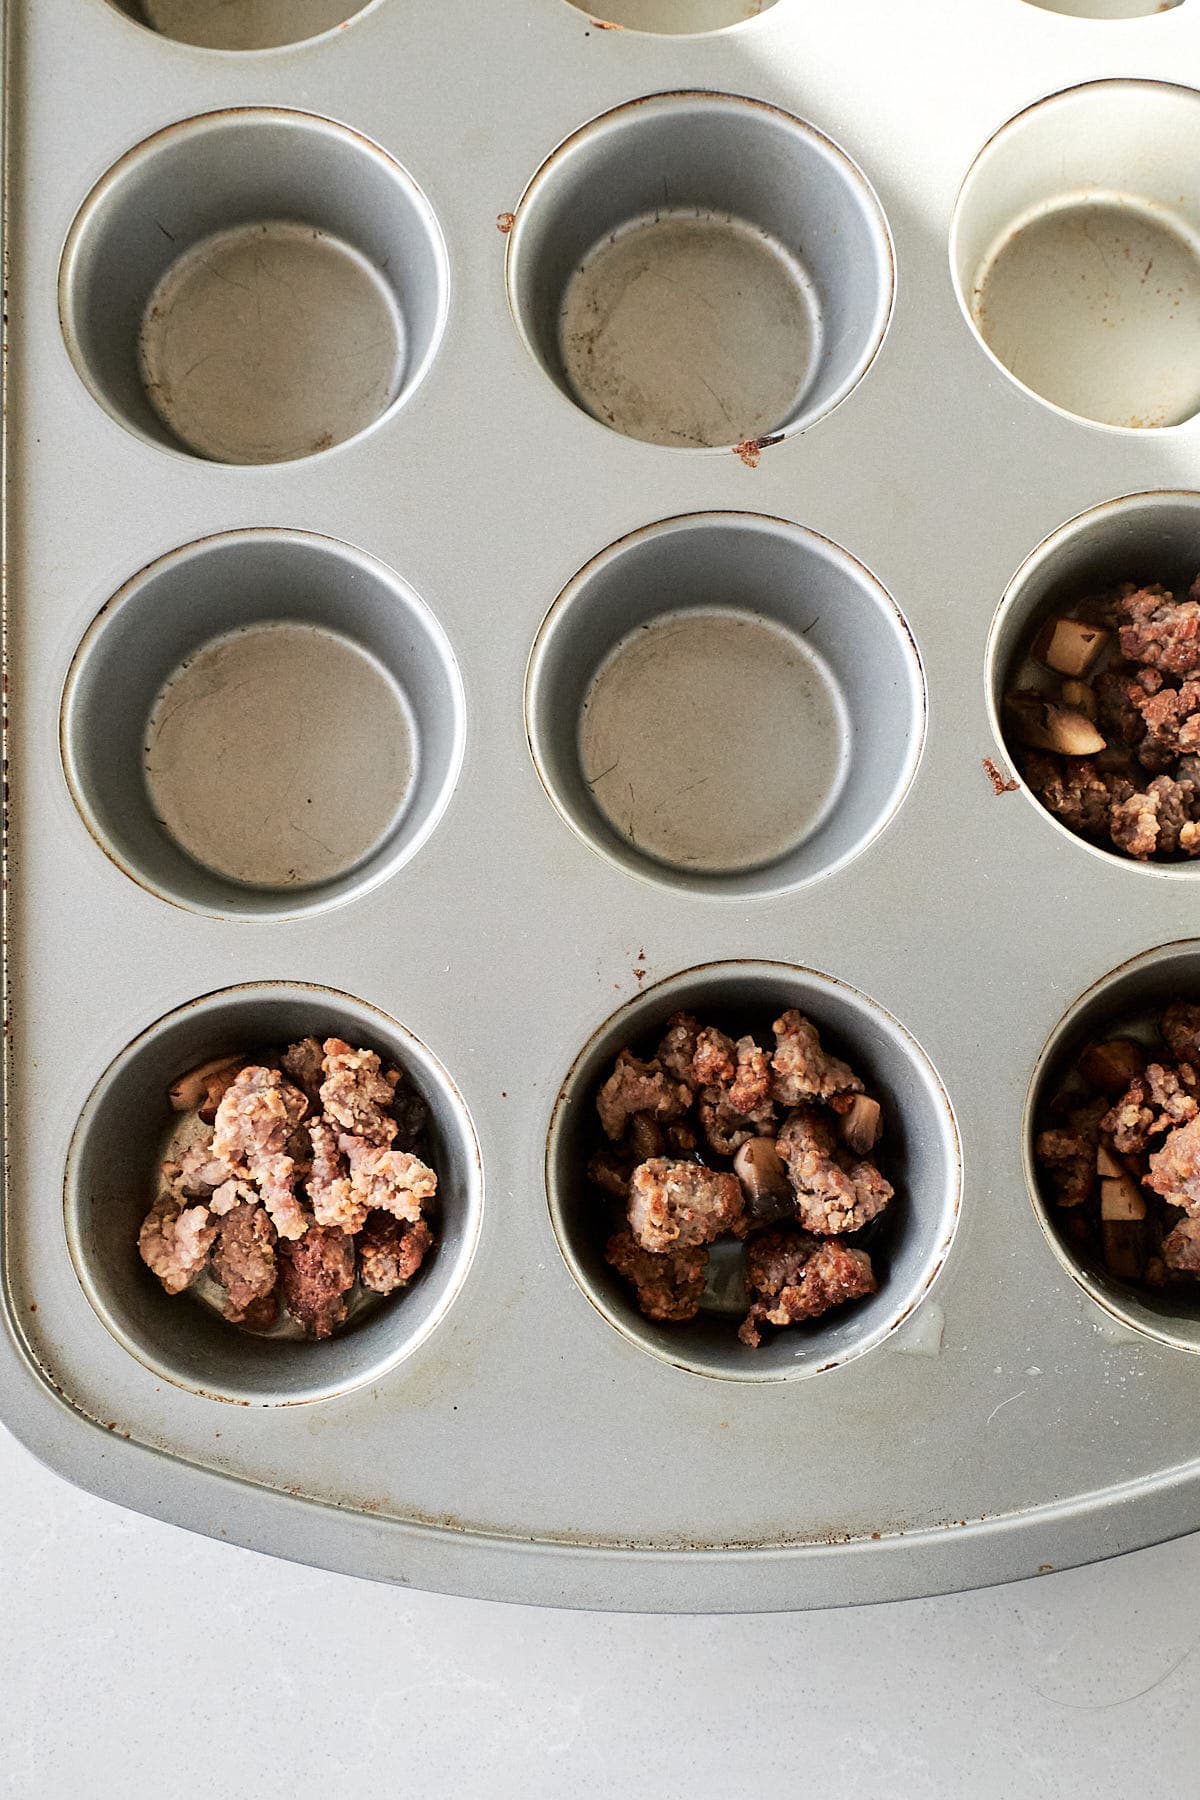 Browned sausage and sauteed mushrooms in a muffin pan cup